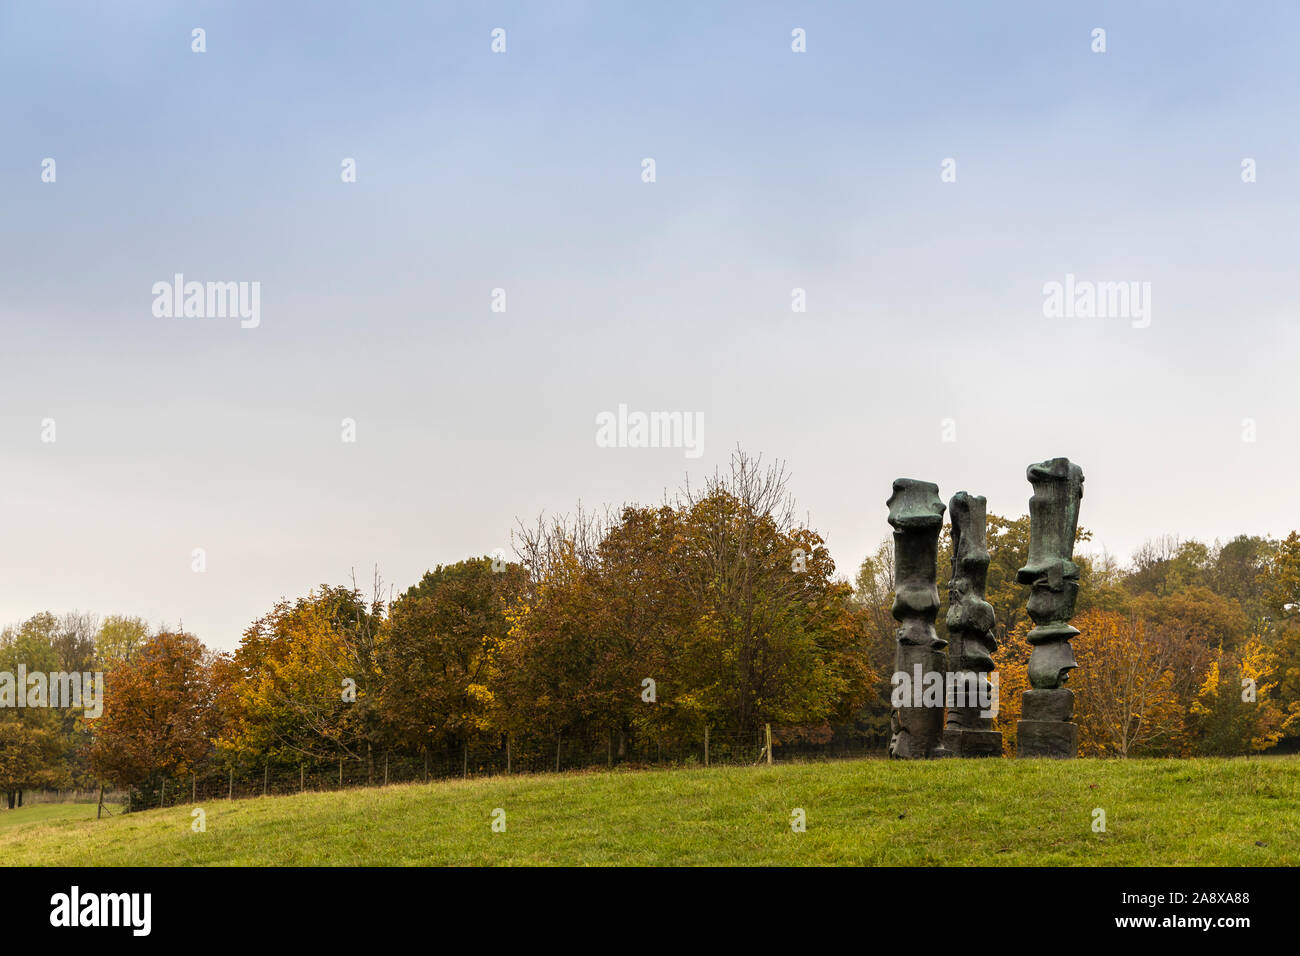 Landscape with Upright Motives No. 1 (Glenkiln Cross): No 2; No 7 bronze sculpture by Henry Moore in Yorkshire Sculpture Park, Wakefield, UK. Stock Photo